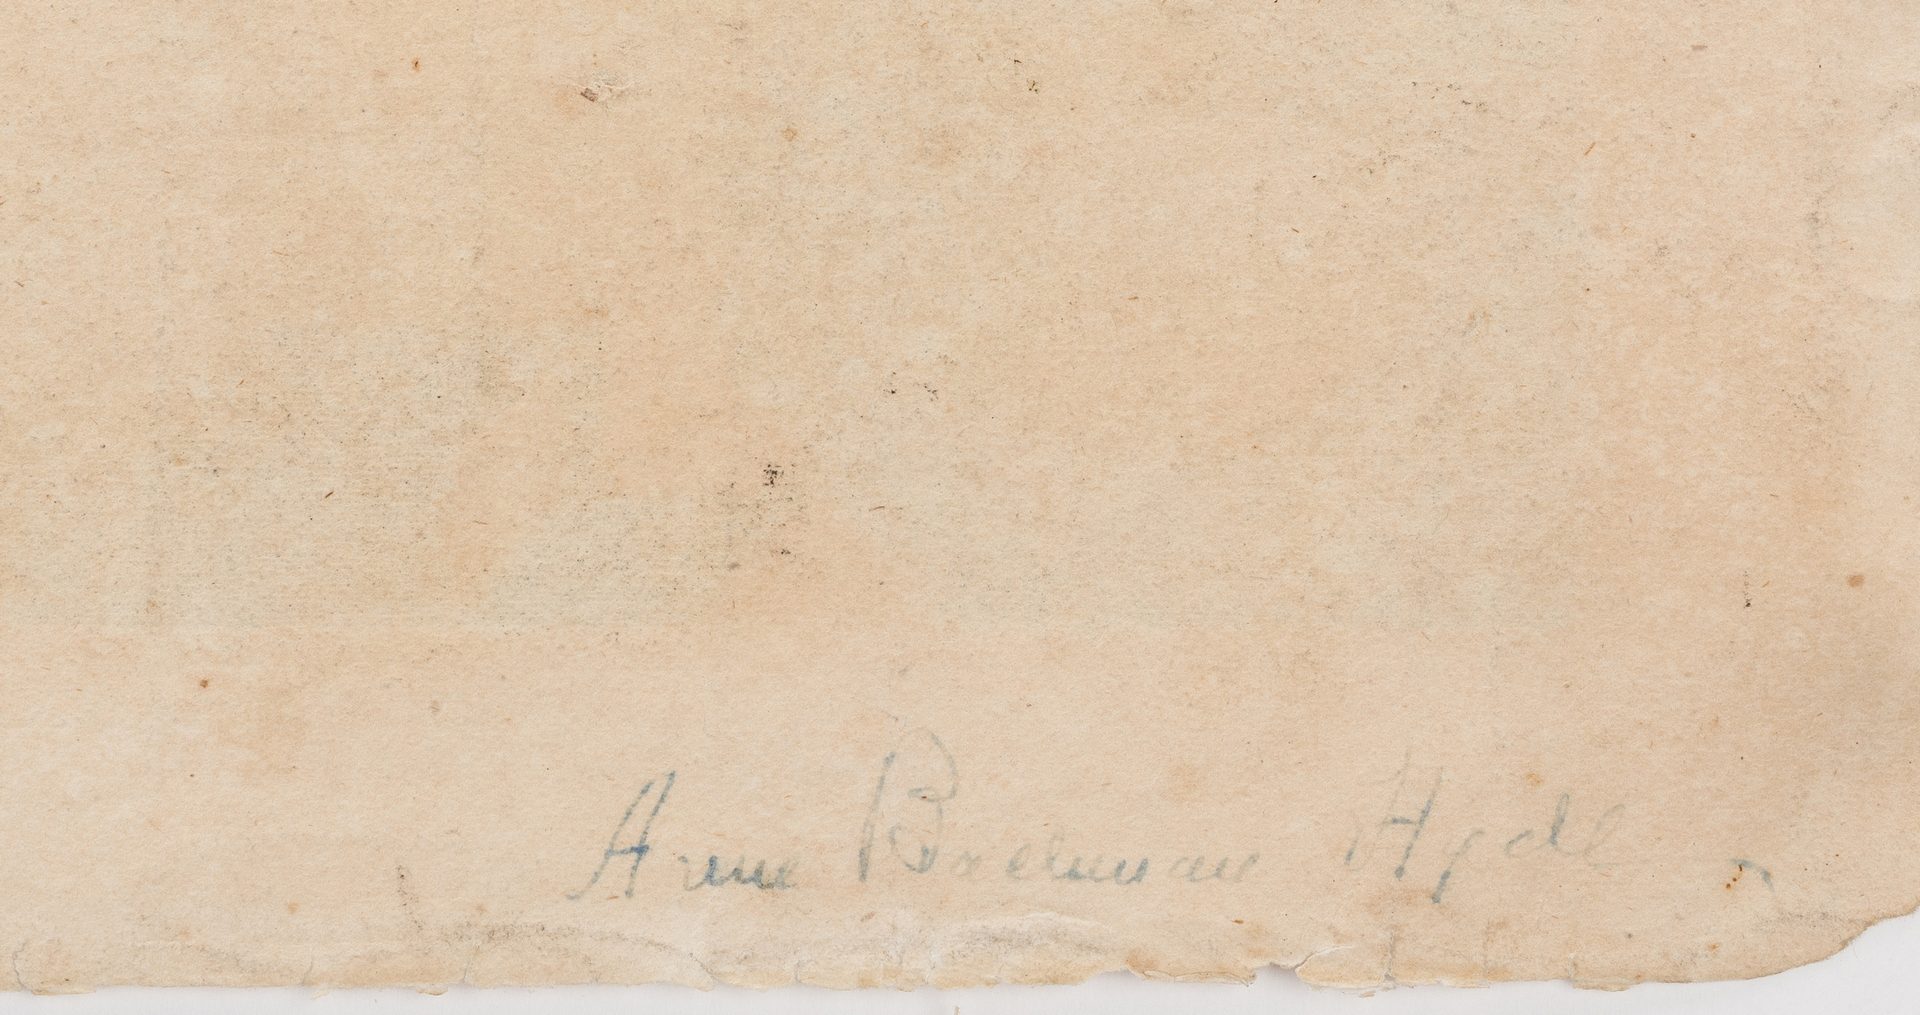 Lot 284: Early View of Nashville